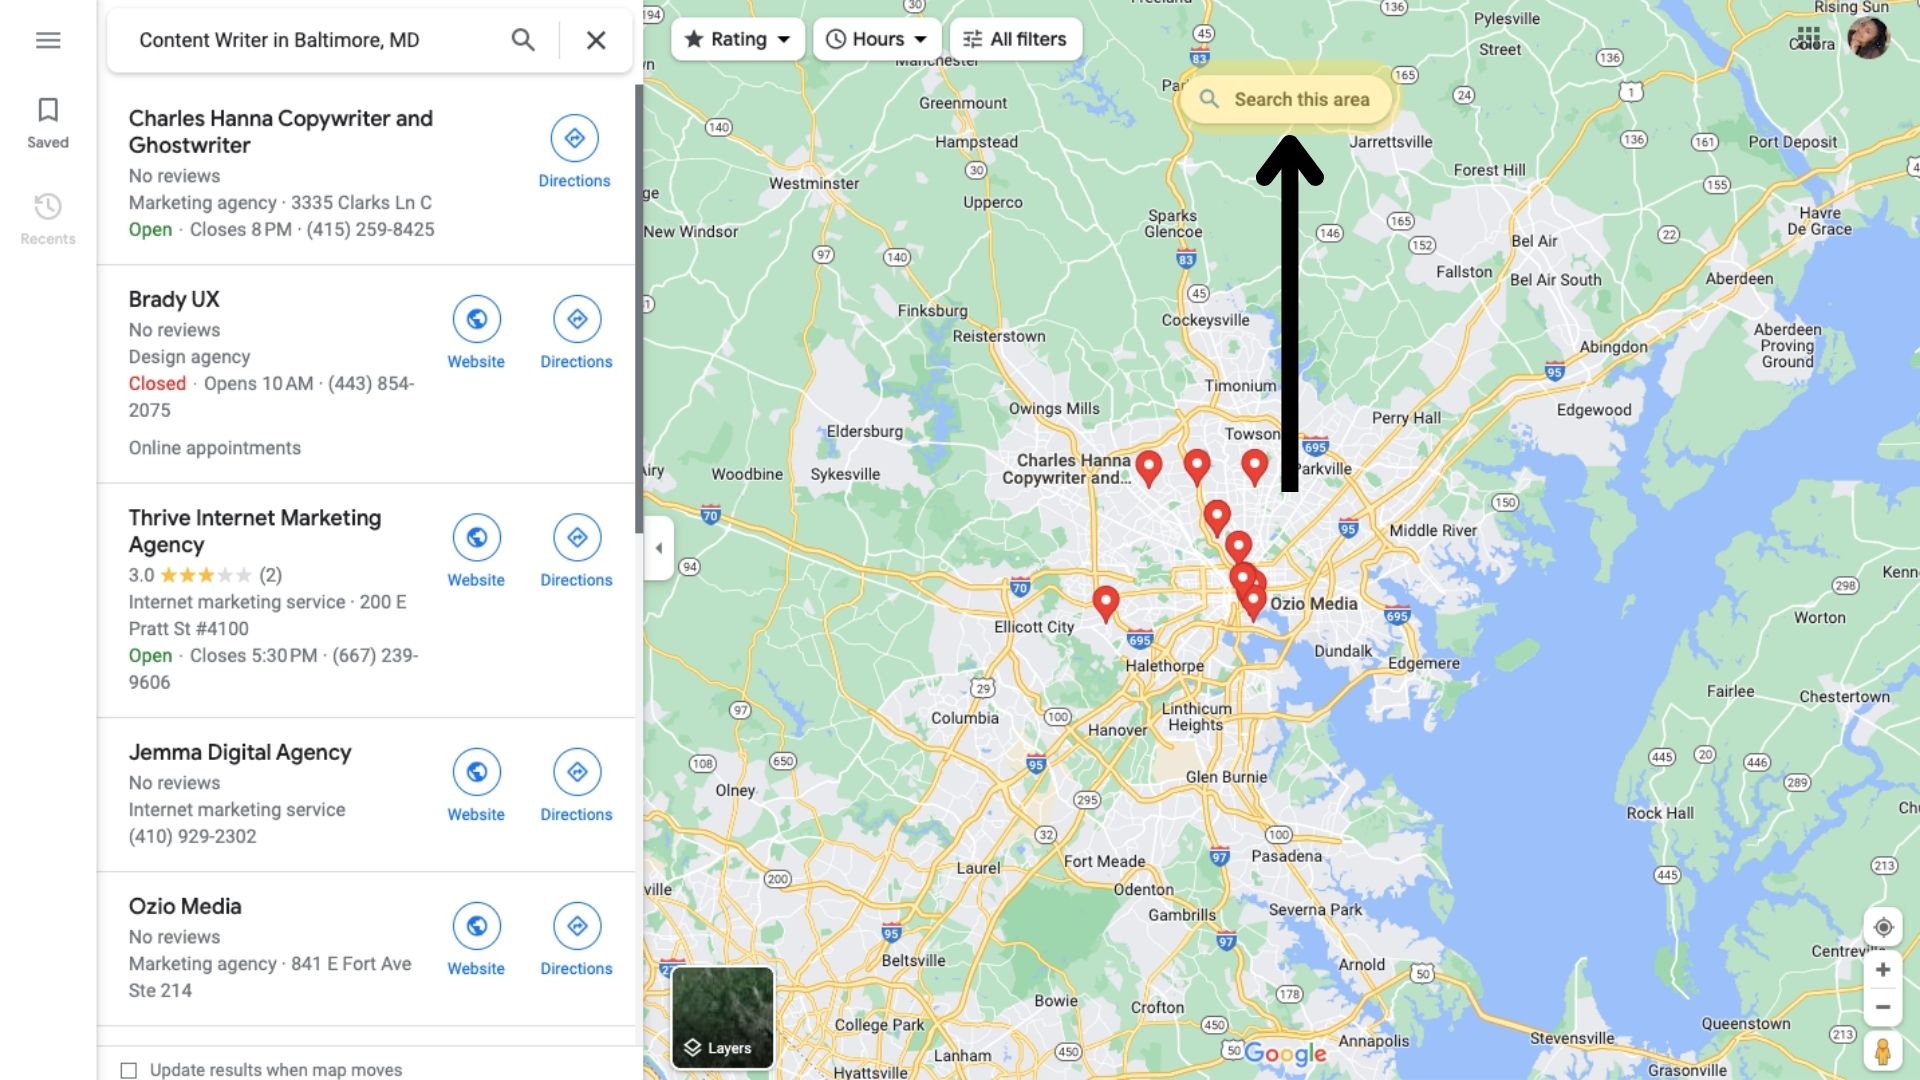 Screenshot showing where to find the "Search this area" button on Google Maps